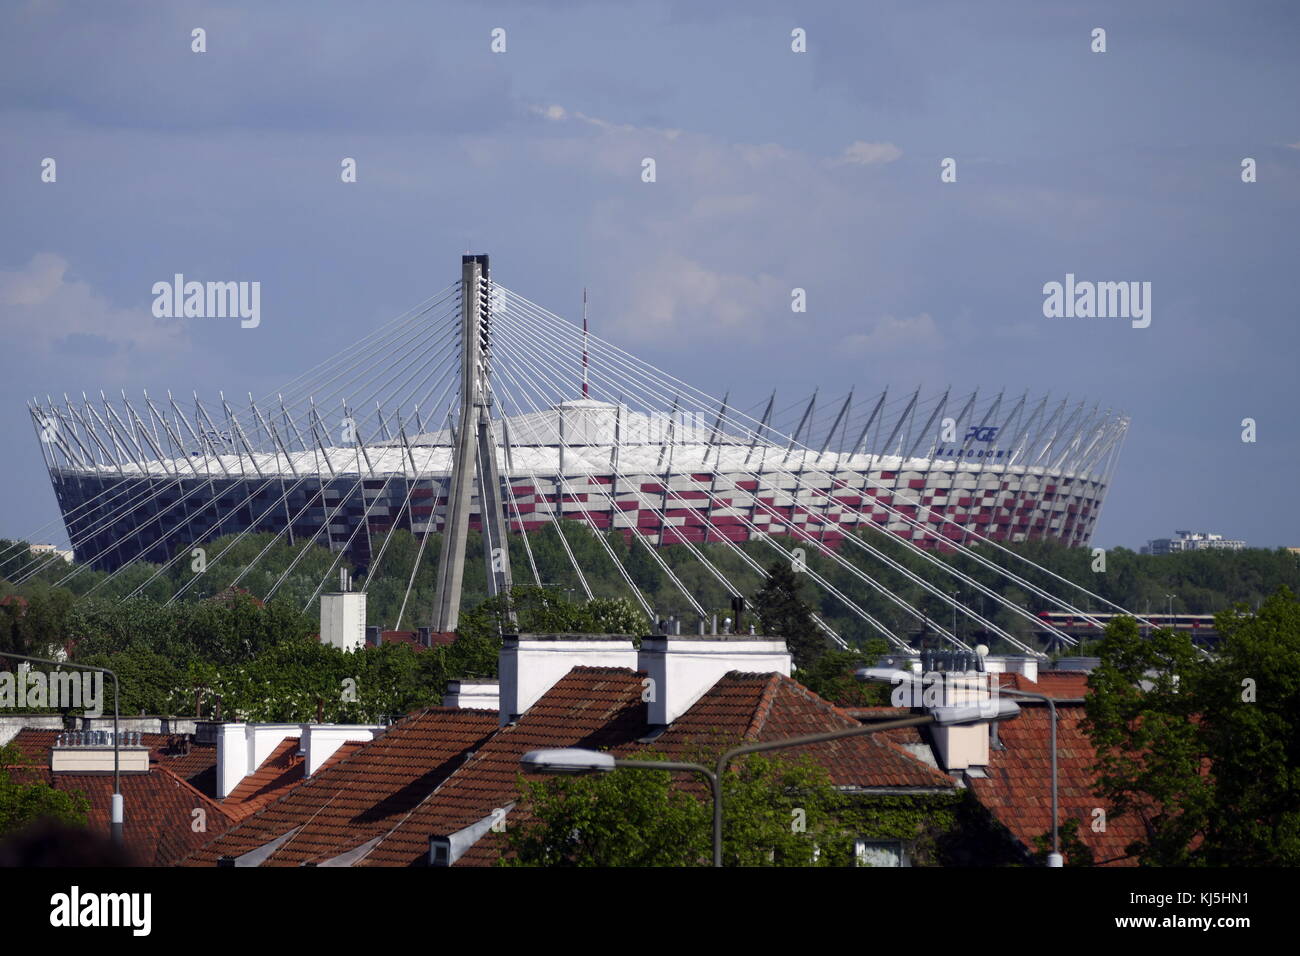 The PGE Narodowy or National Stadium (Stadion Narodowy) is a retractable roof football stadium located in Warsaw, Poland. It is used mostly for football matches and it is the home stadium of Poland national football team. Stock Photo